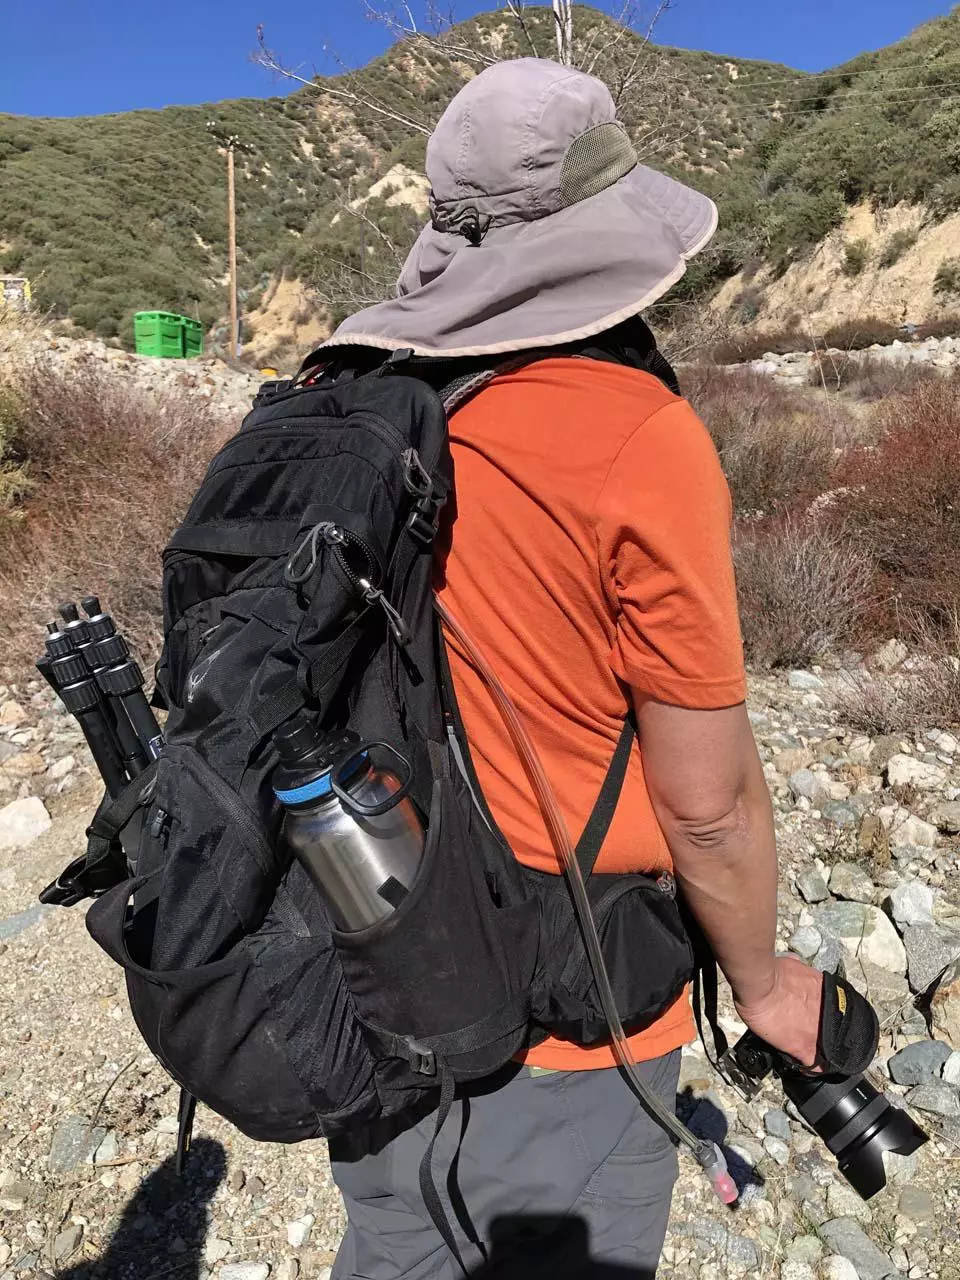 The Osprey Manta 34 is a high-end backpack that works very well for hiking